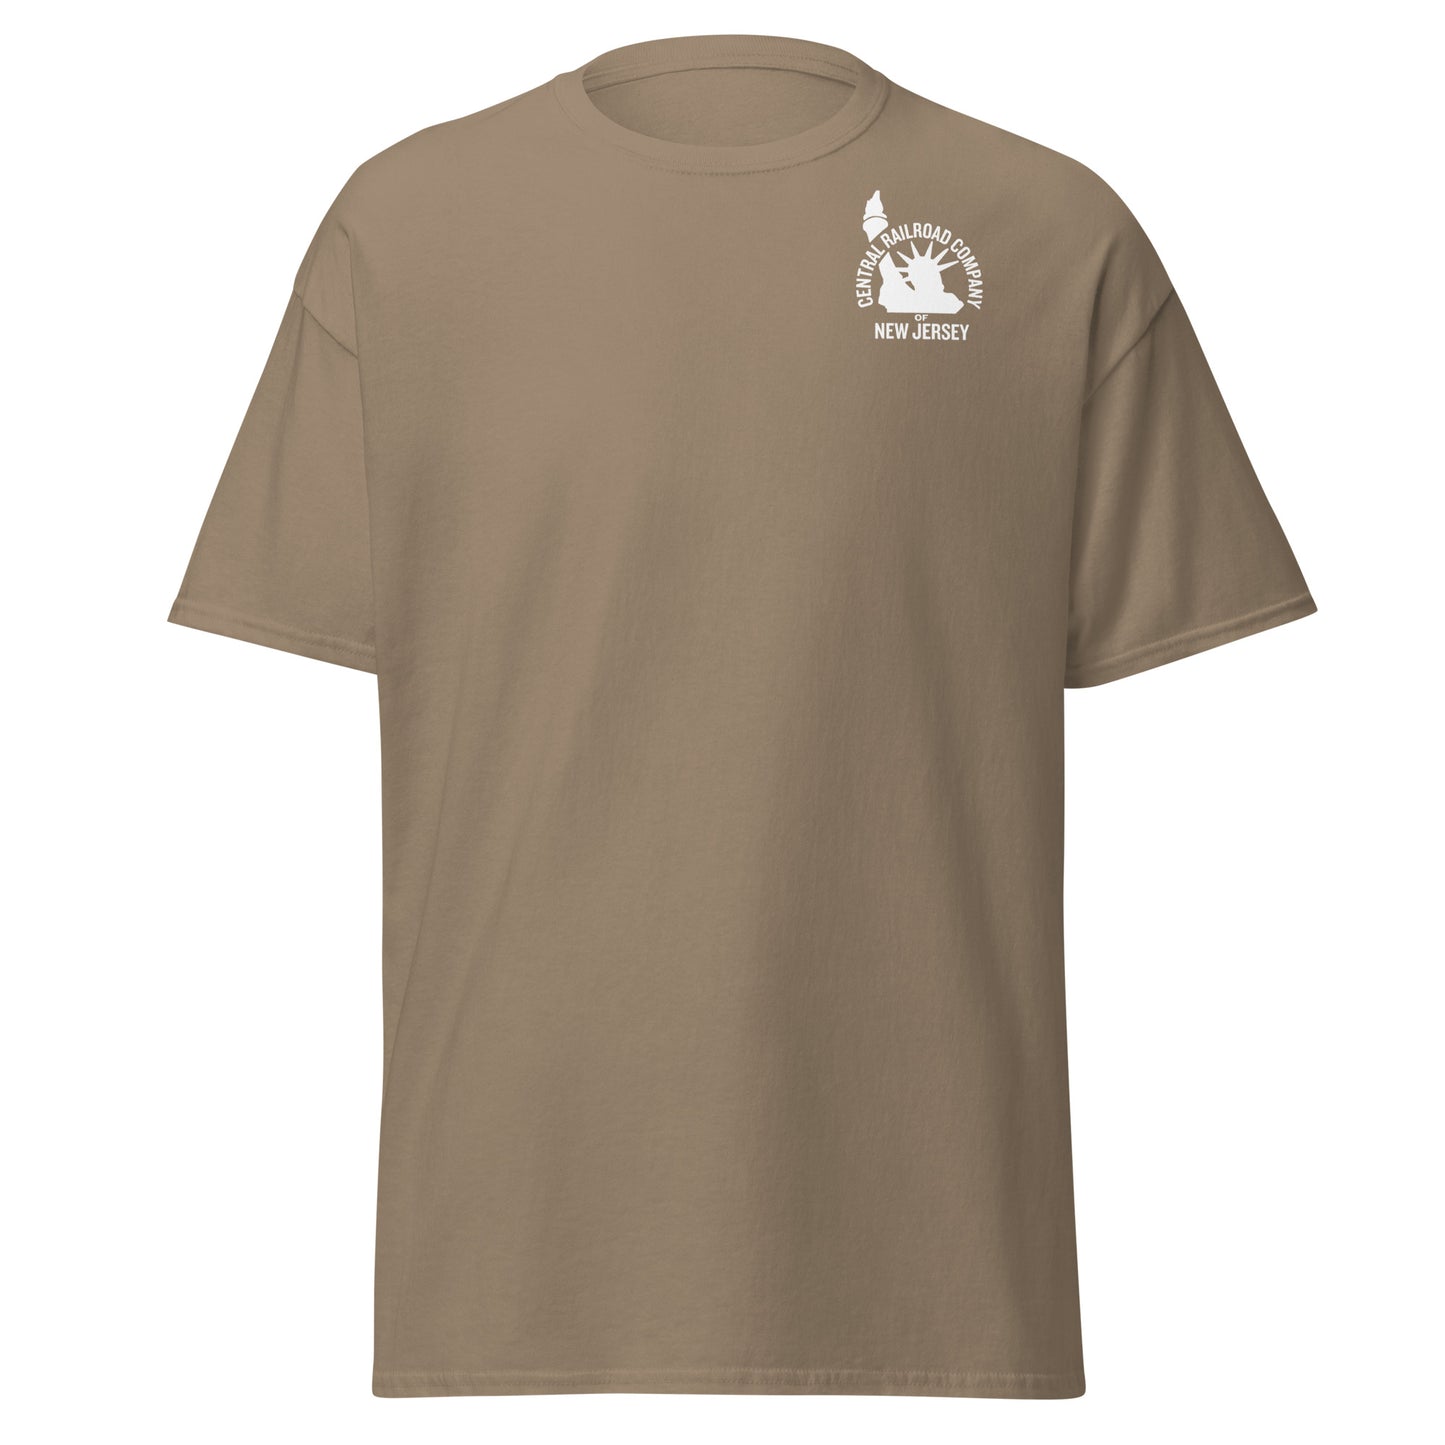 Central Railroad Company of New Jersey classic tee